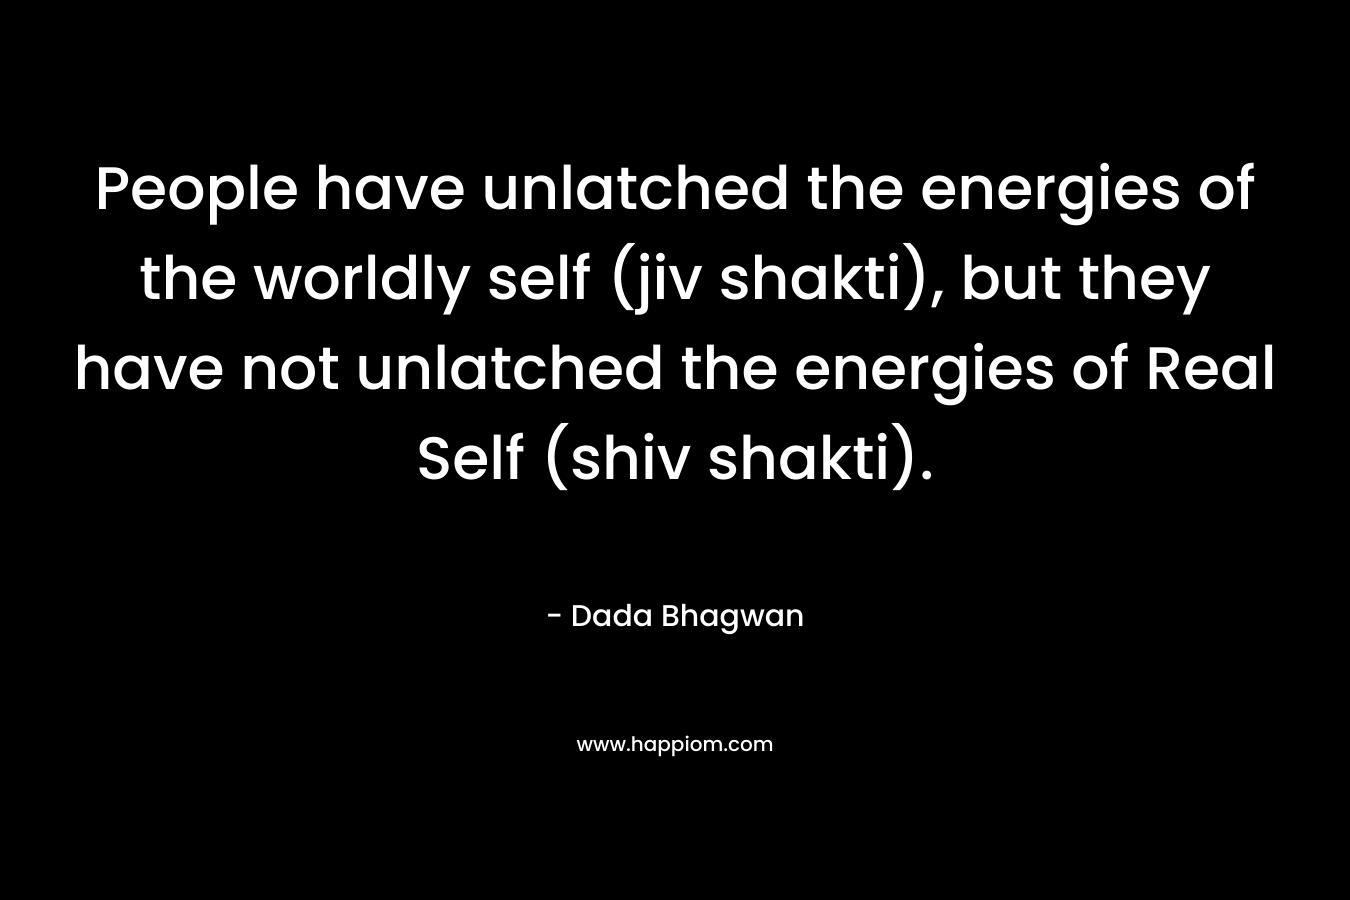 People have unlatched the energies of the worldly self (jiv shakti), but they have not unlatched the energies of Real Self (shiv shakti). – Dada Bhagwan